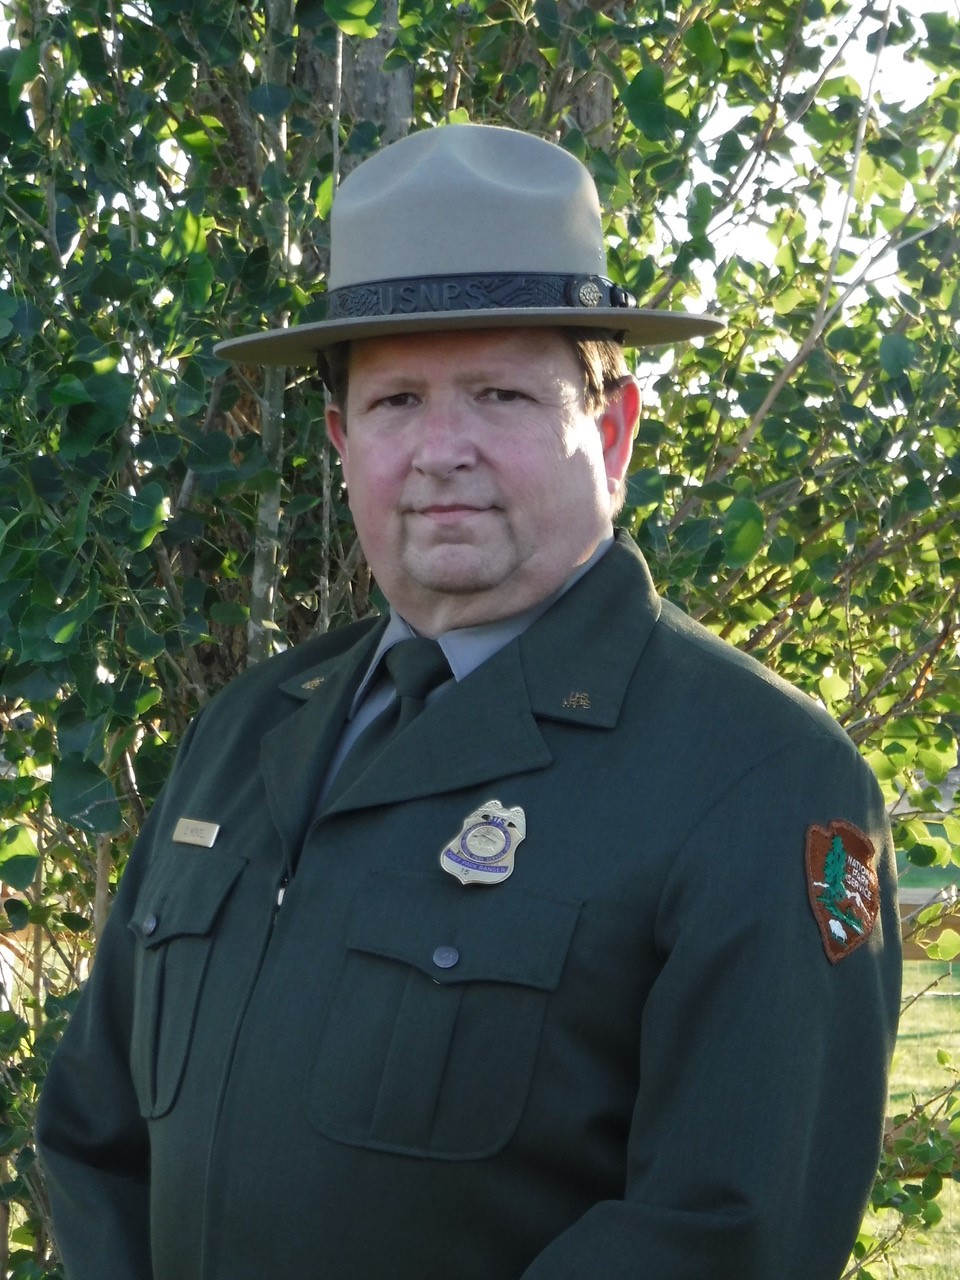 A head-and-shoulders portrait of Chris Mengel in full NPS formal uniform and flat hat, looking at the camera with a serious expression with green foliage in the background.